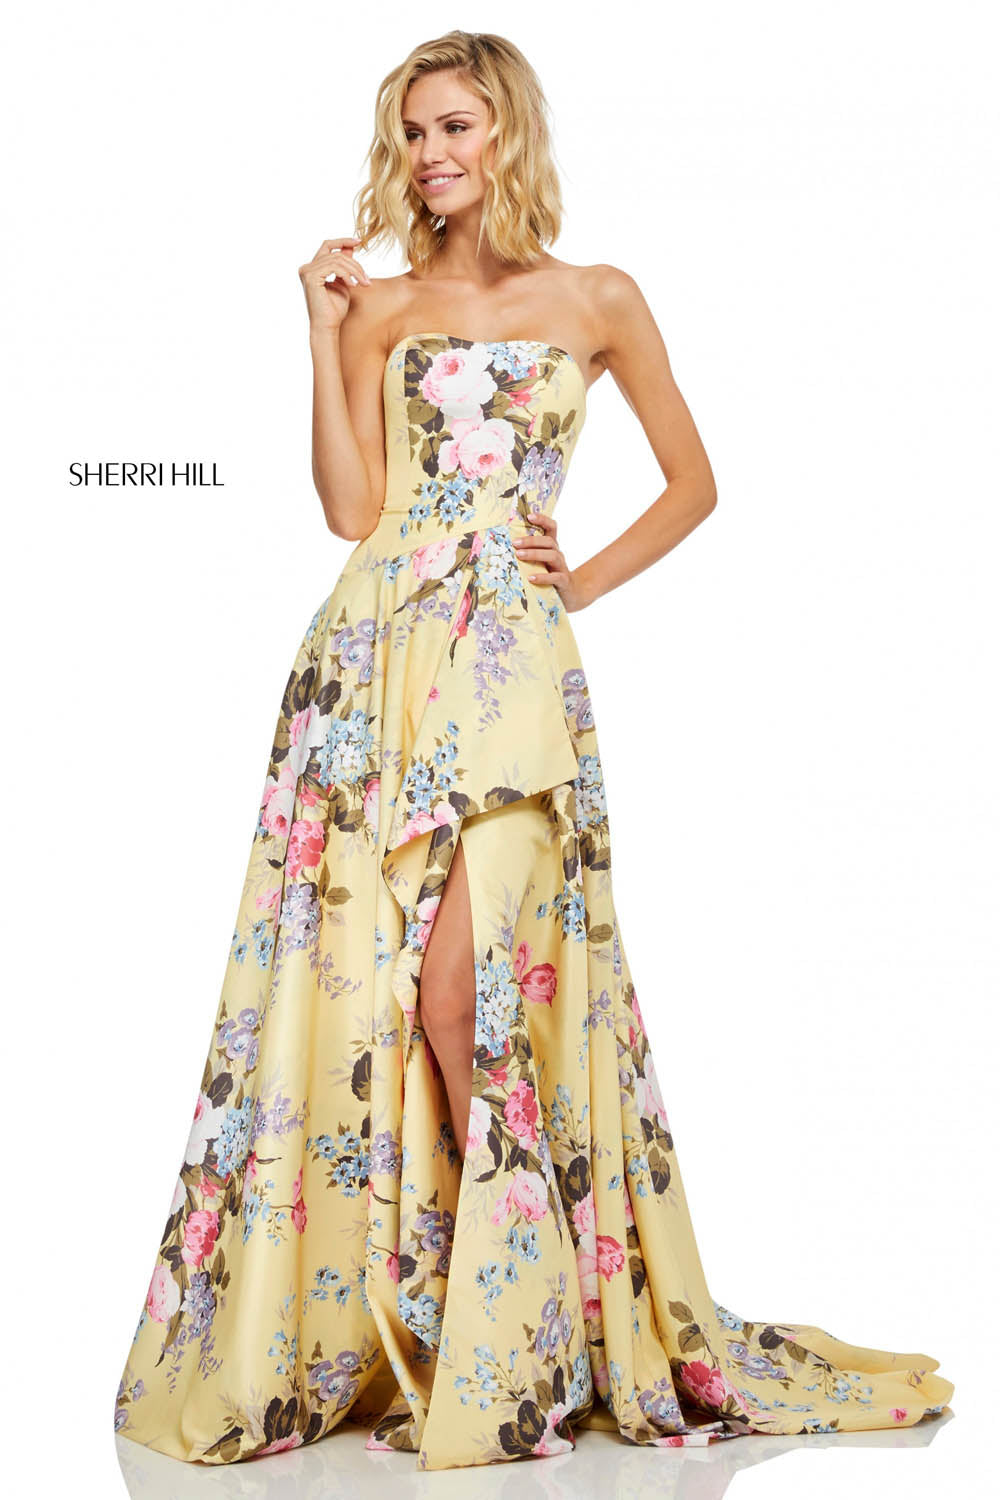 Sherri Hill's Stand-Out Styles